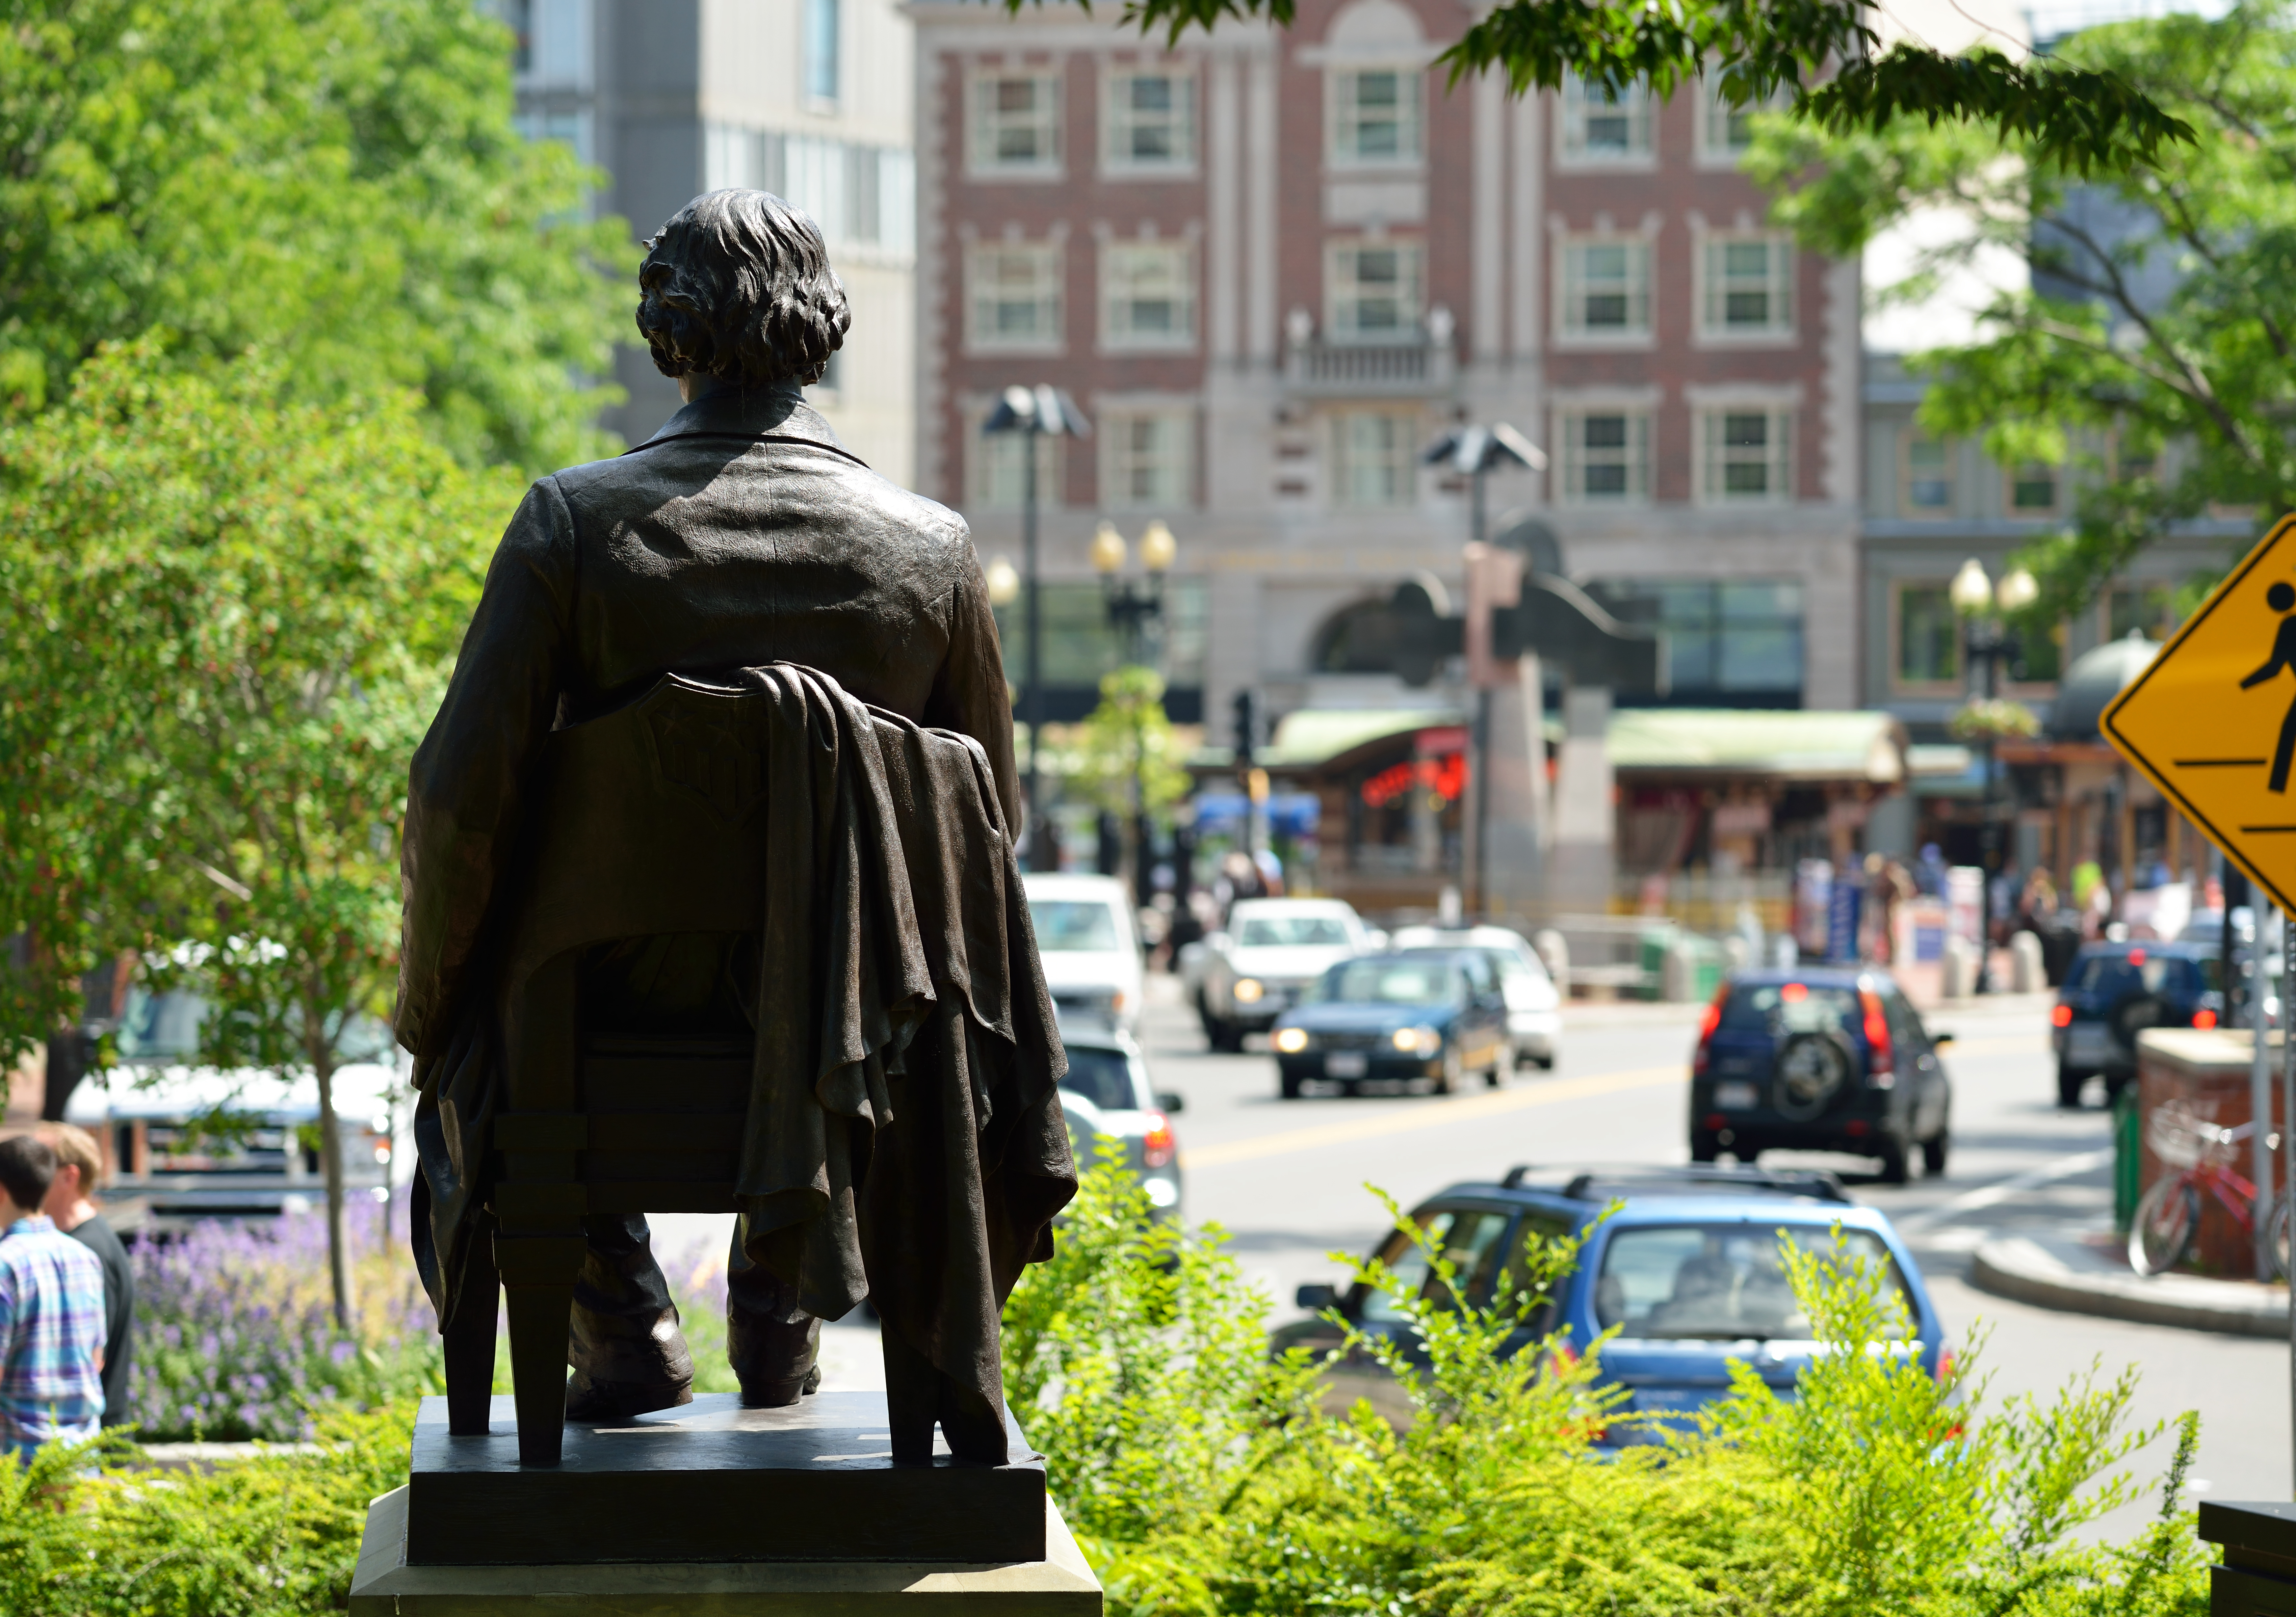 A statue of a man seated overlooking a busy square in a city.